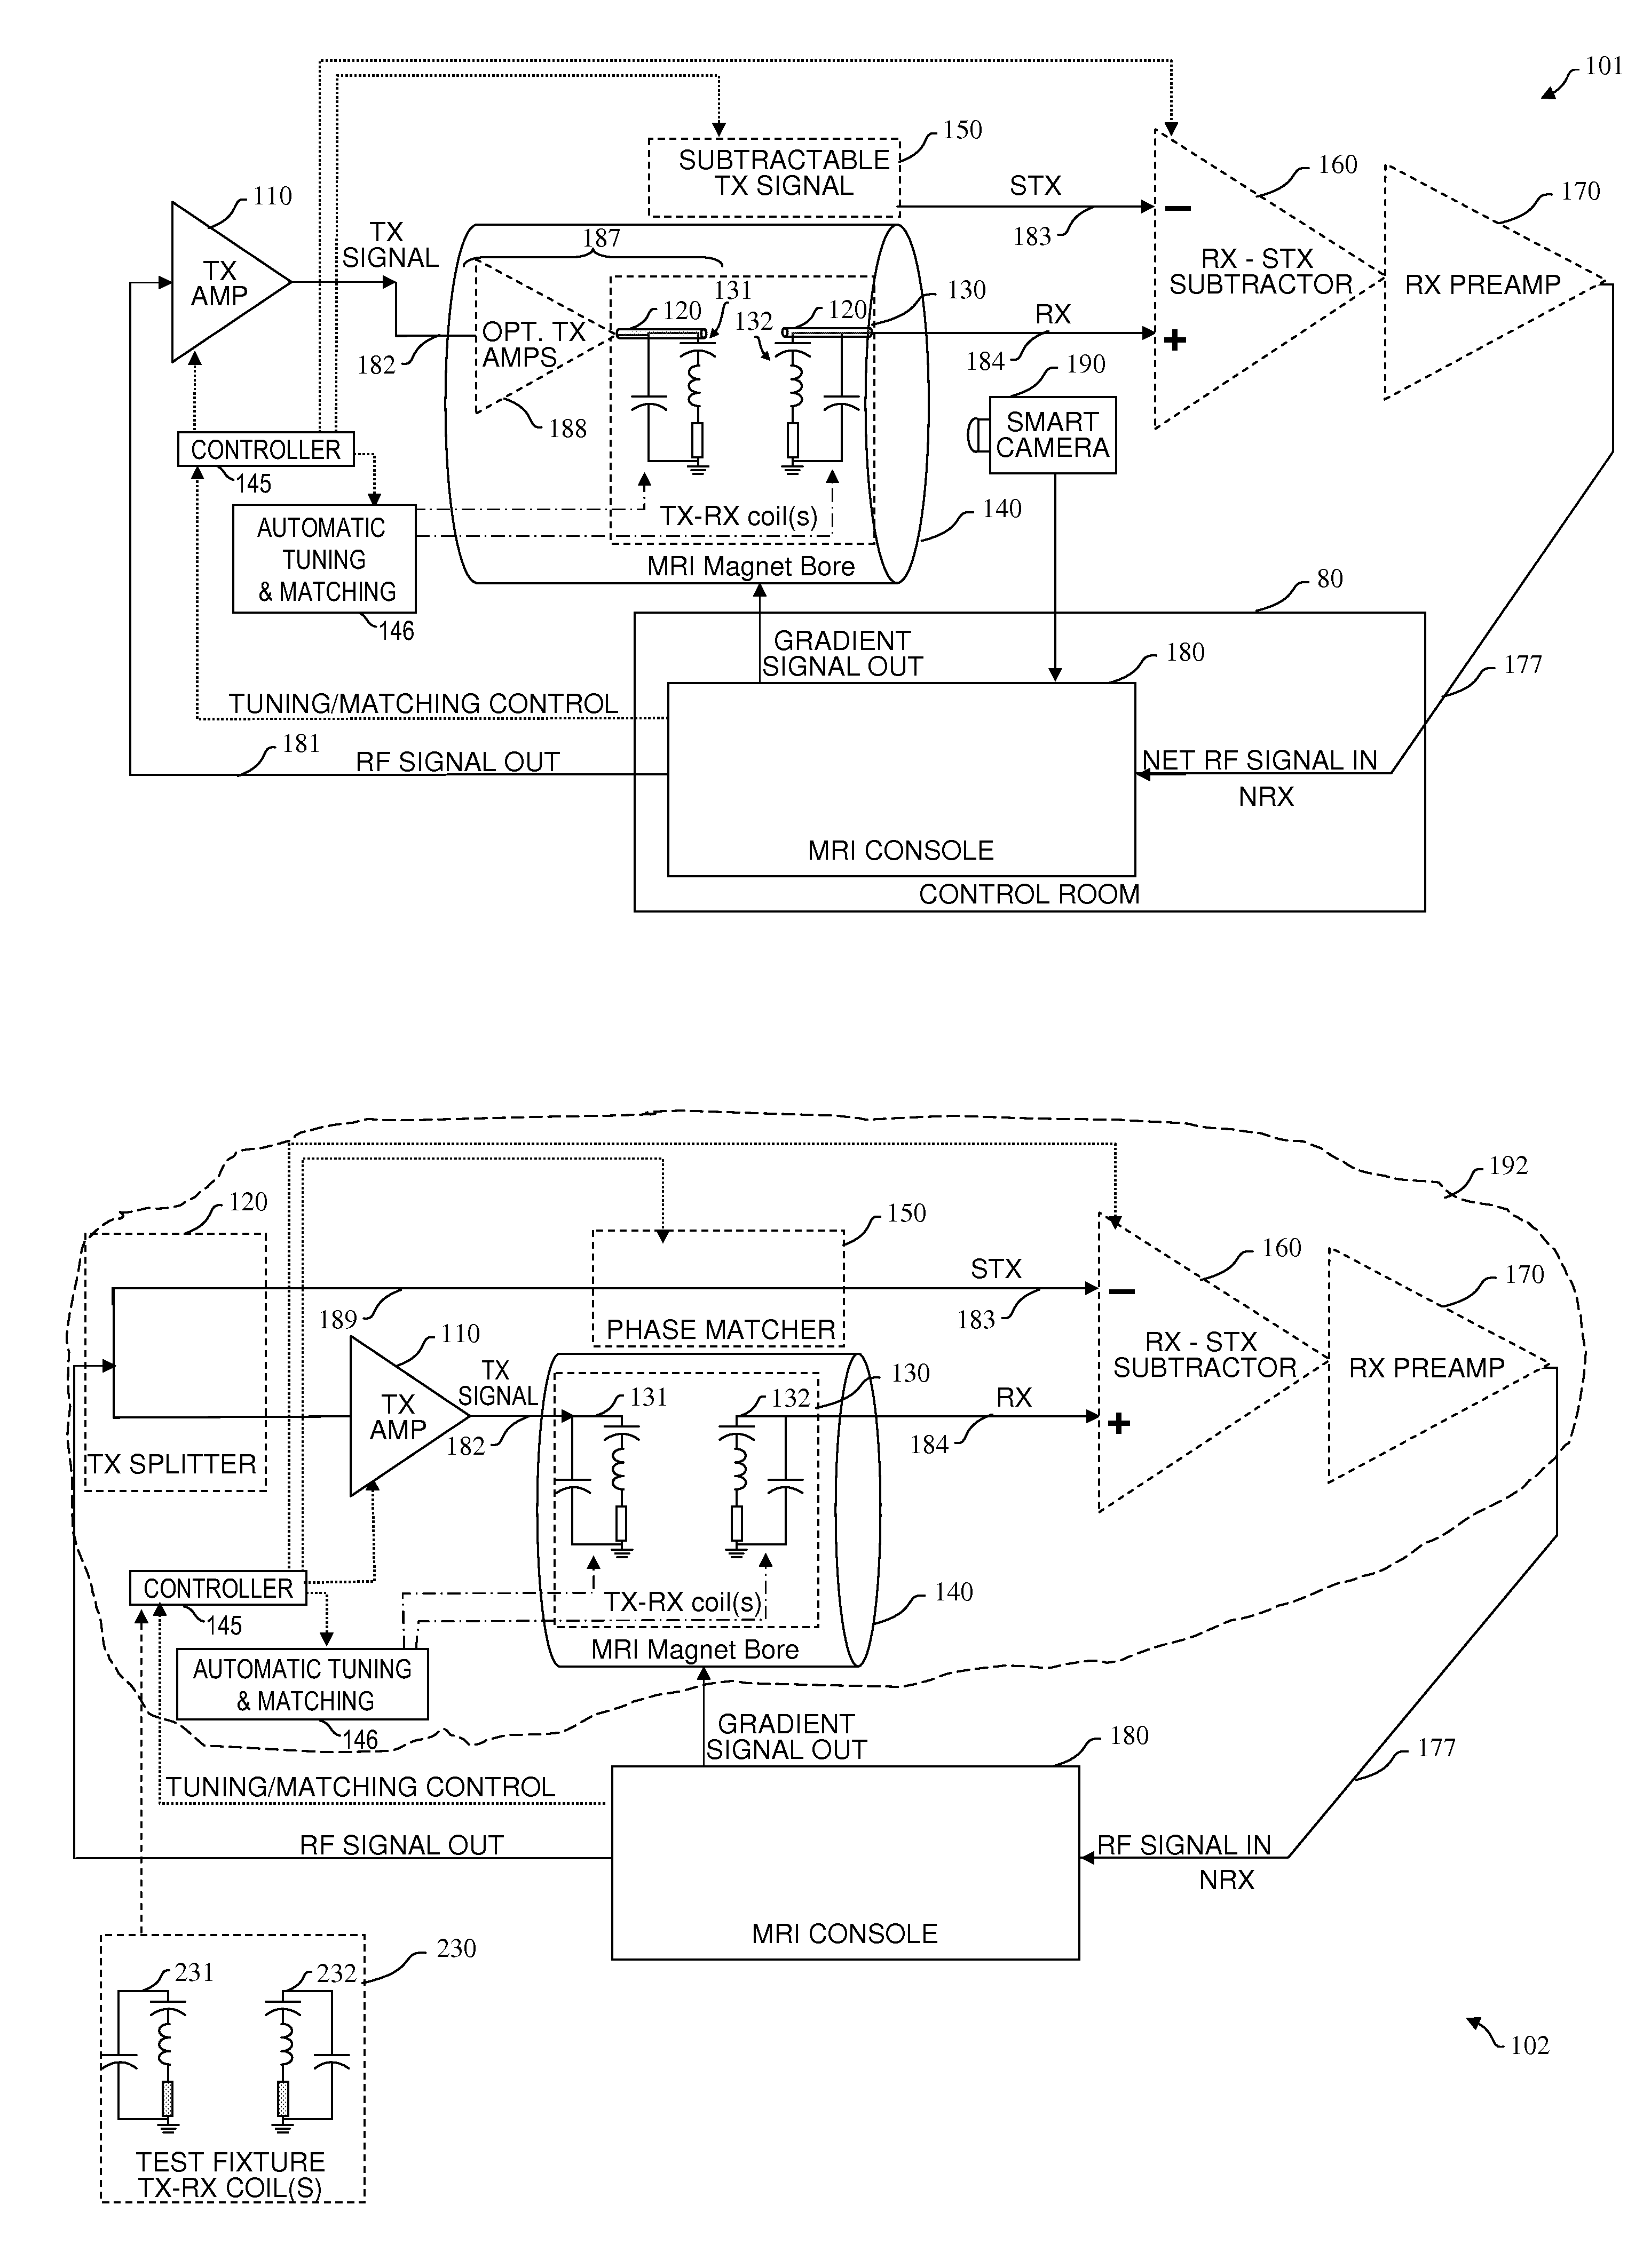 Simultaneous tx-rx for MRI systems and other antenna devices